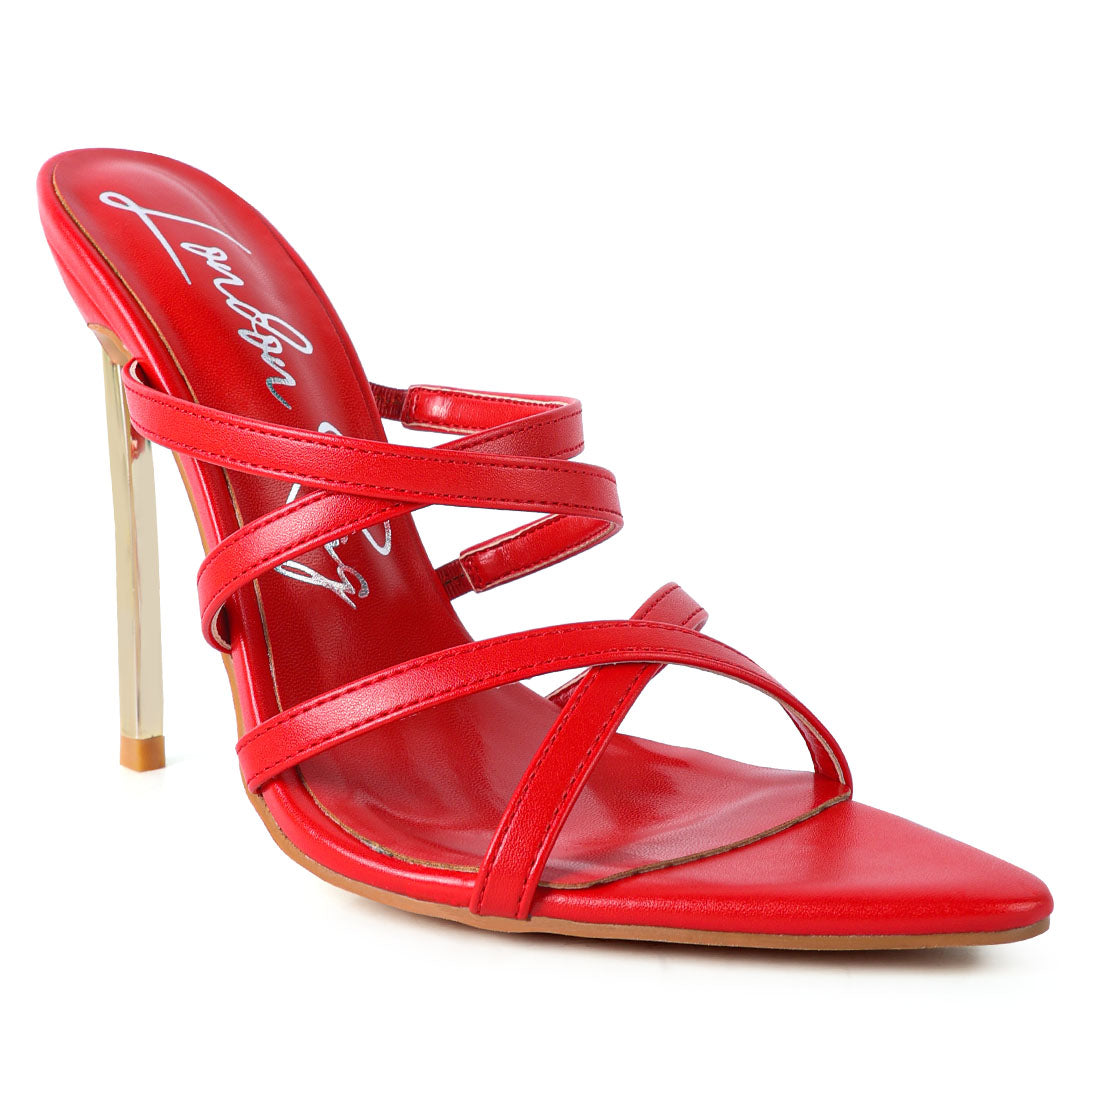 Red High Heeled Sandals